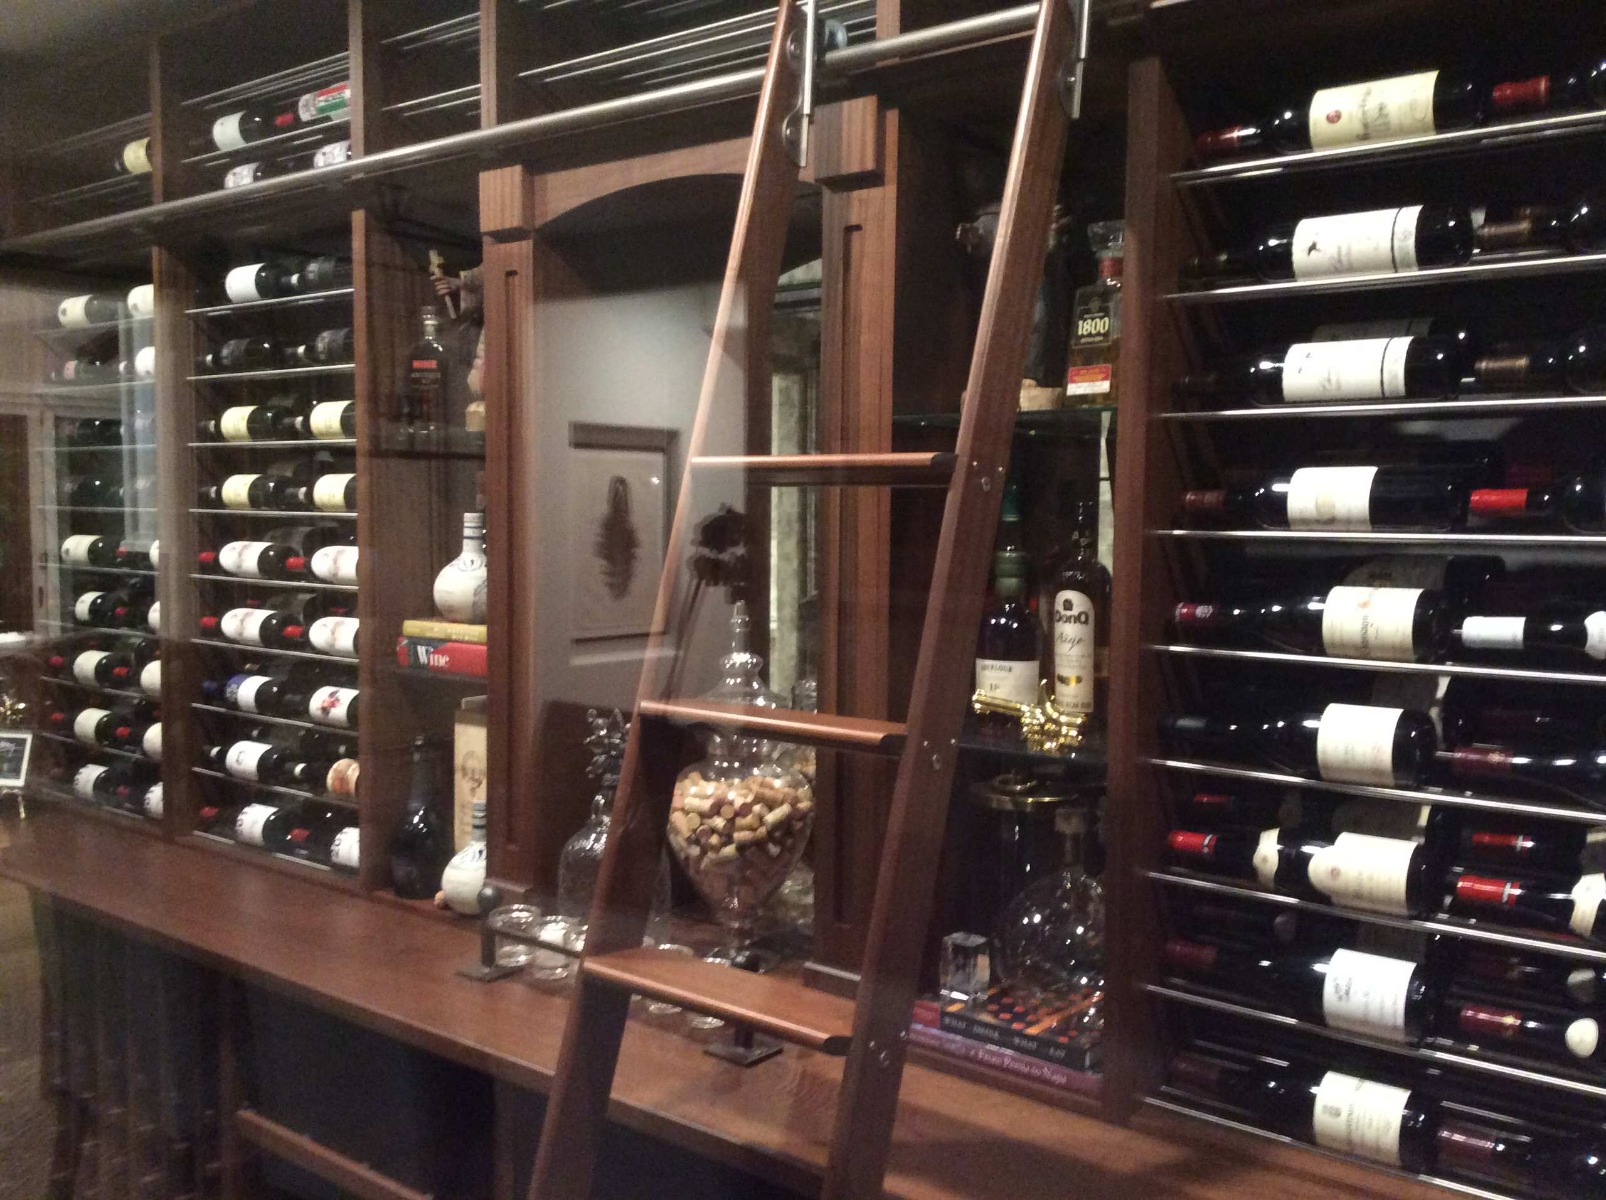 Wood and metal for the wine racks with glass door